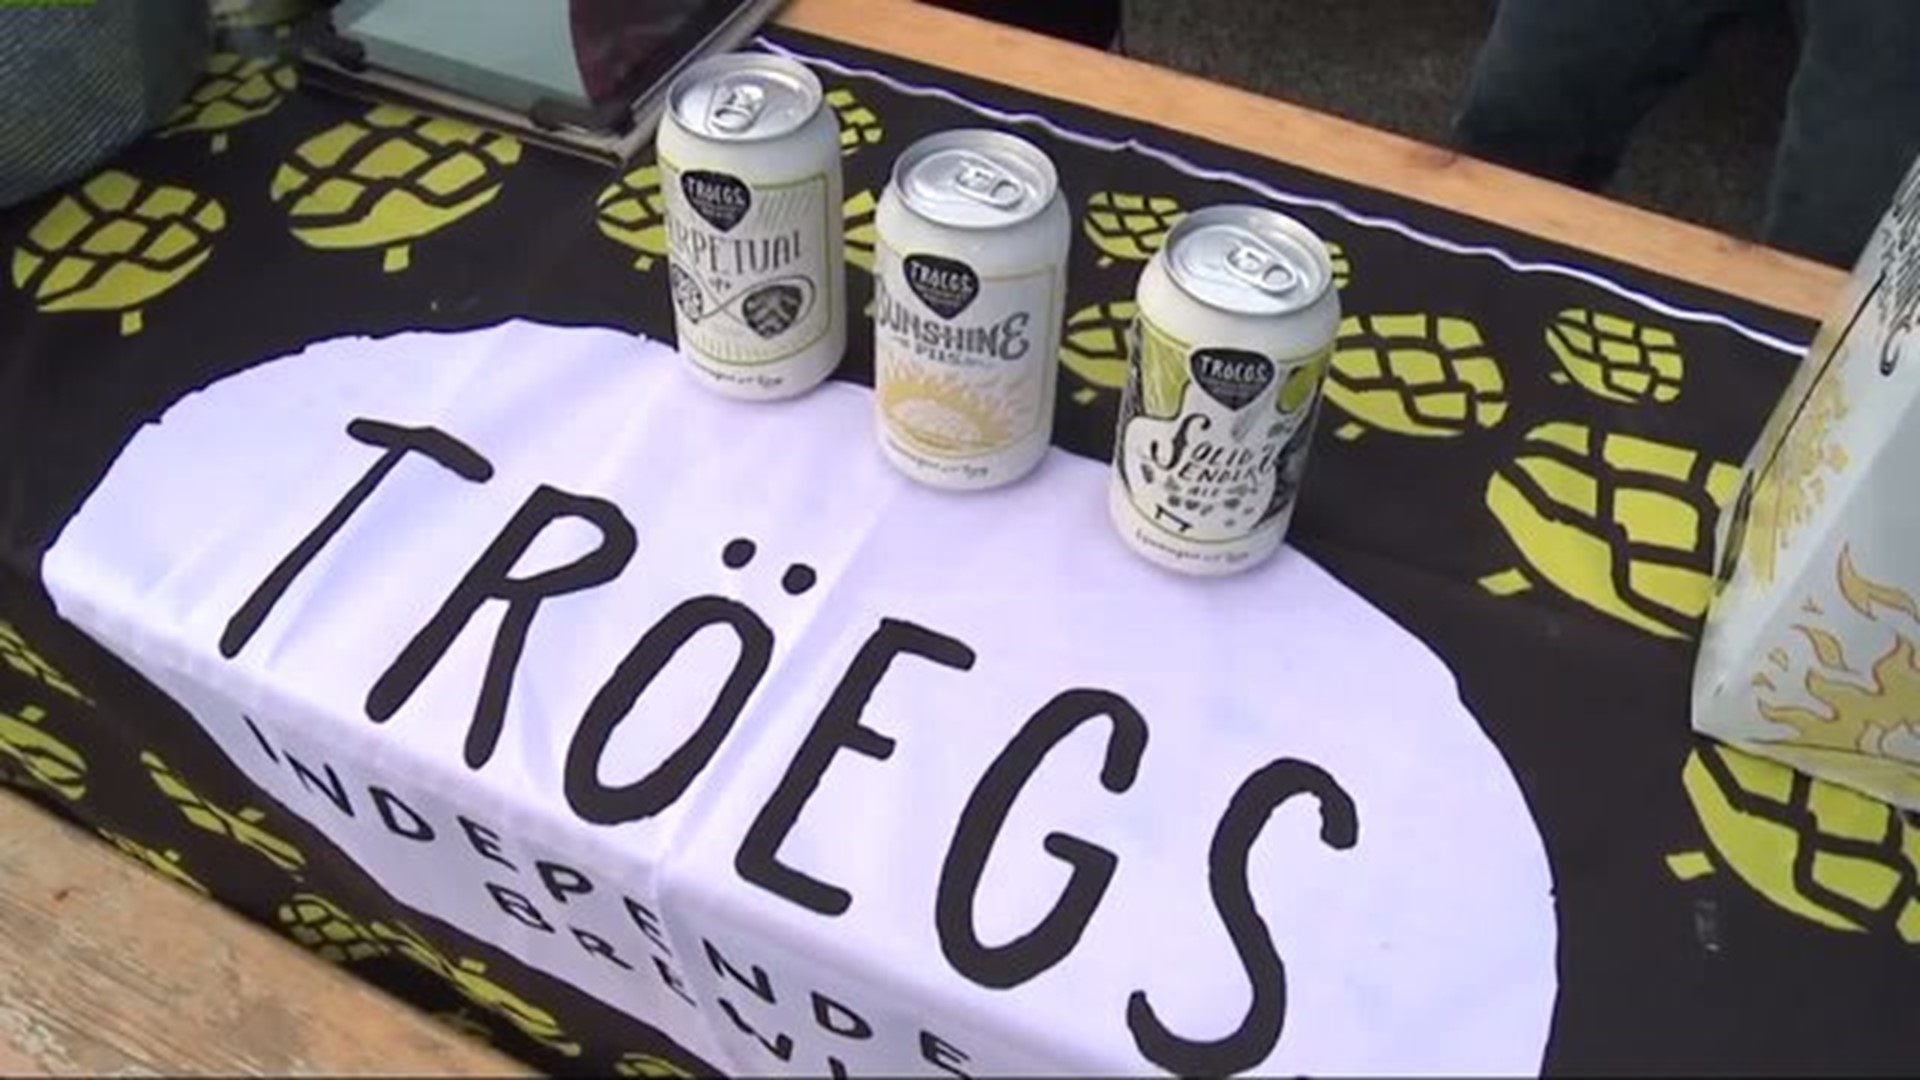 Troegs Brewing Company reveals their summertime selections